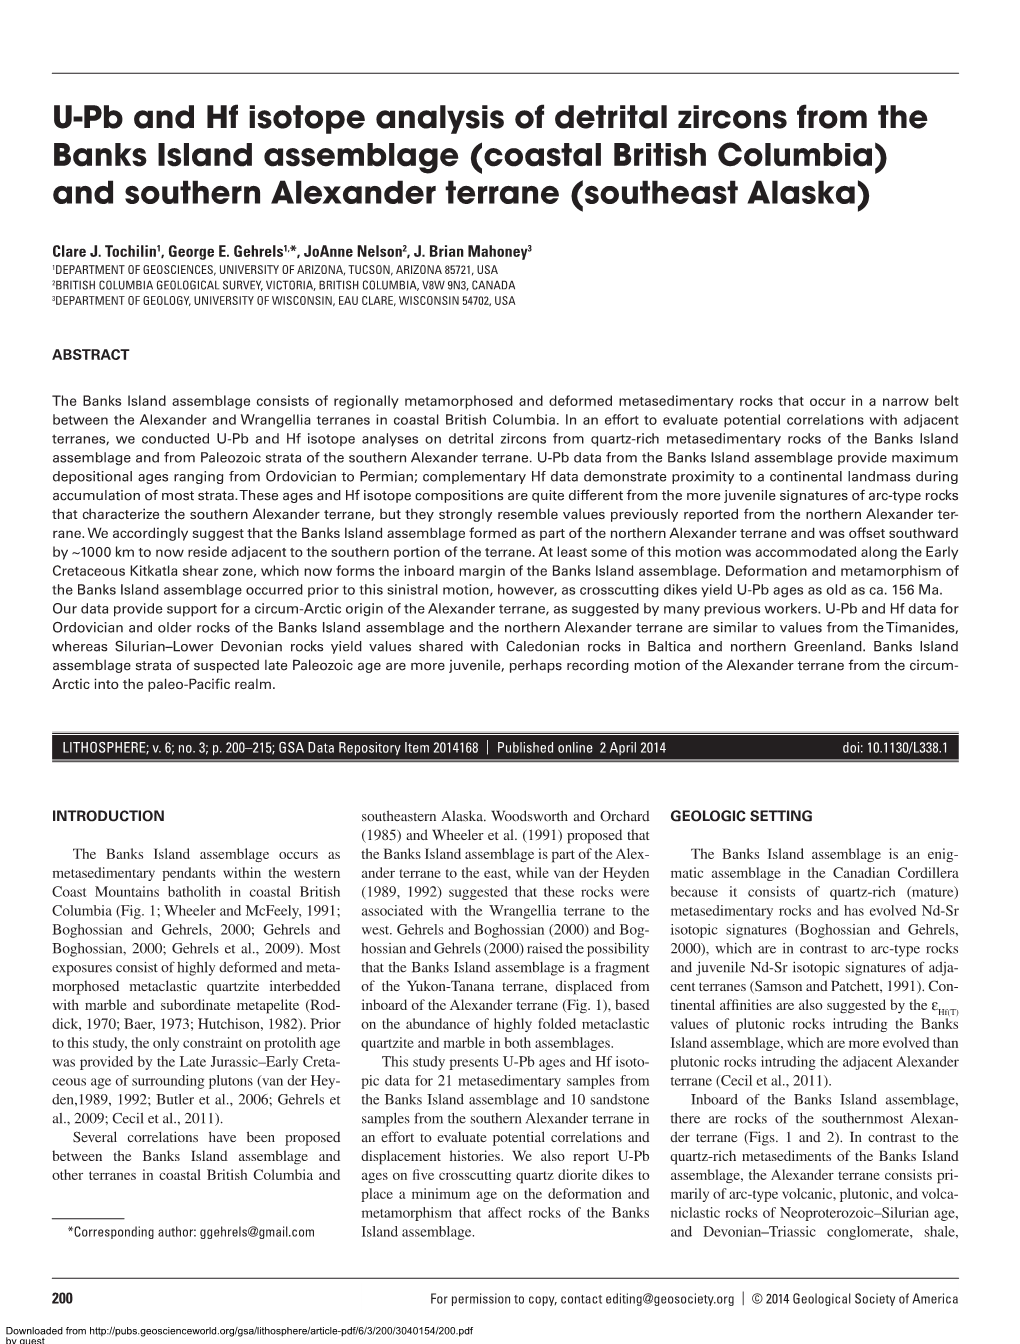 U-Pb and Hf Isotope Analysis of Detrital Zircons from the Banks Island Assemblage (Coastal British Columbia) and Southern Alexander Terrane (Southeast Alaska)